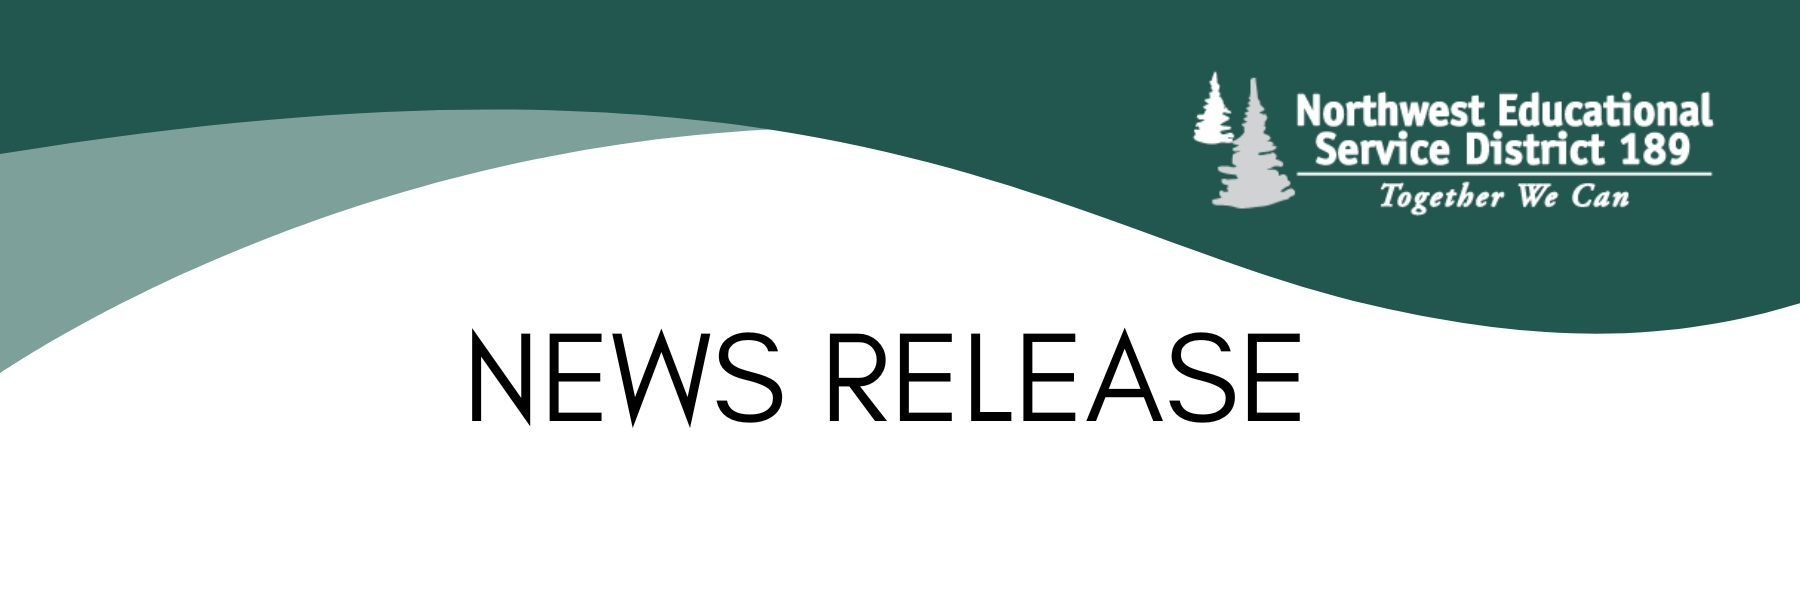 NWESD news release banner